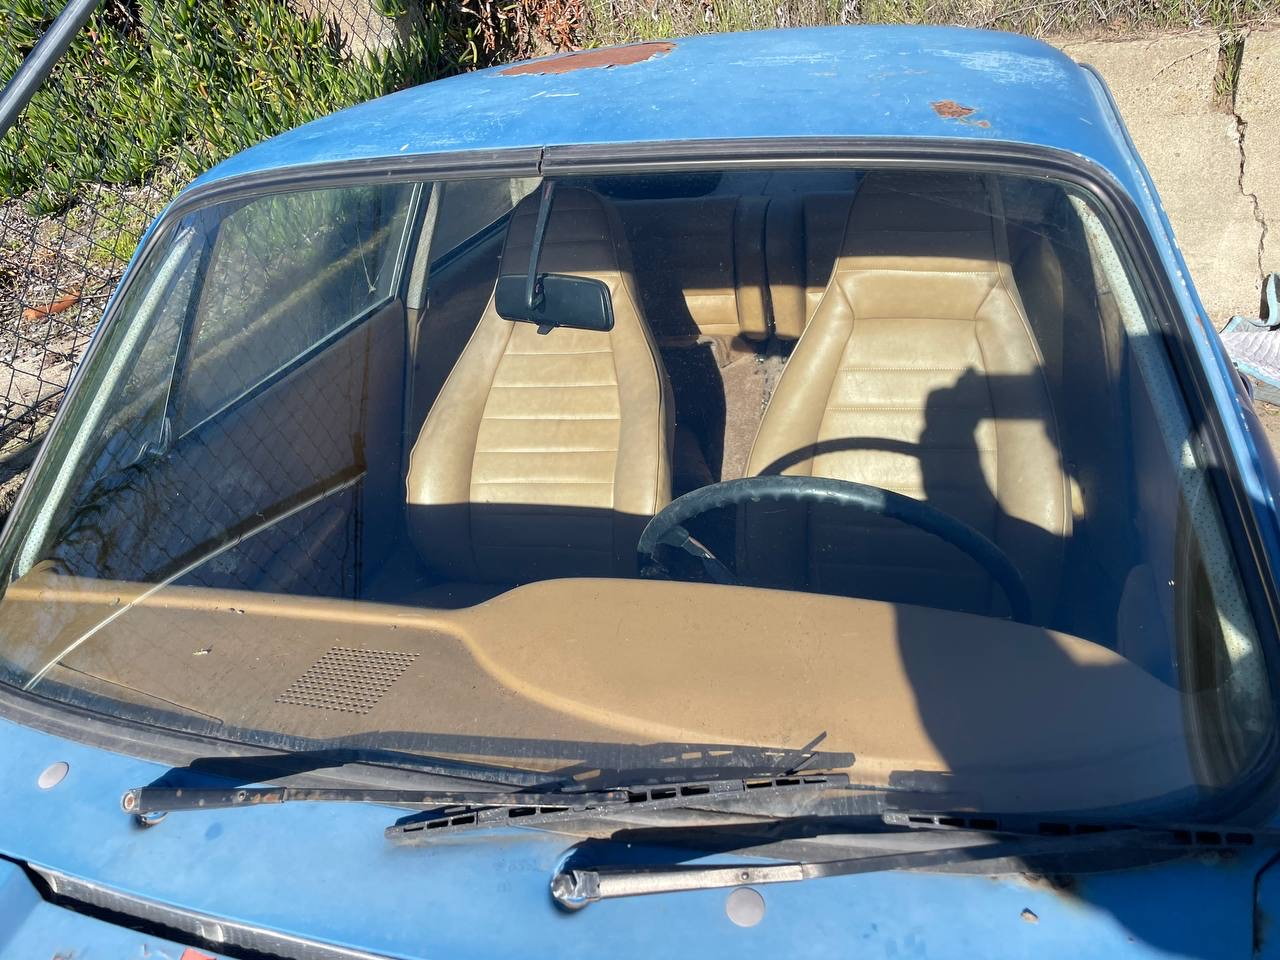 1968 Porsche 911 - 1968 912 Restoration project with 1967 911 engine - Used - VIN 11800000 - 83,000 Miles - 6 cyl - 2WD - Manual - Coupe - Blue - San Francisco, CA 94121, United States